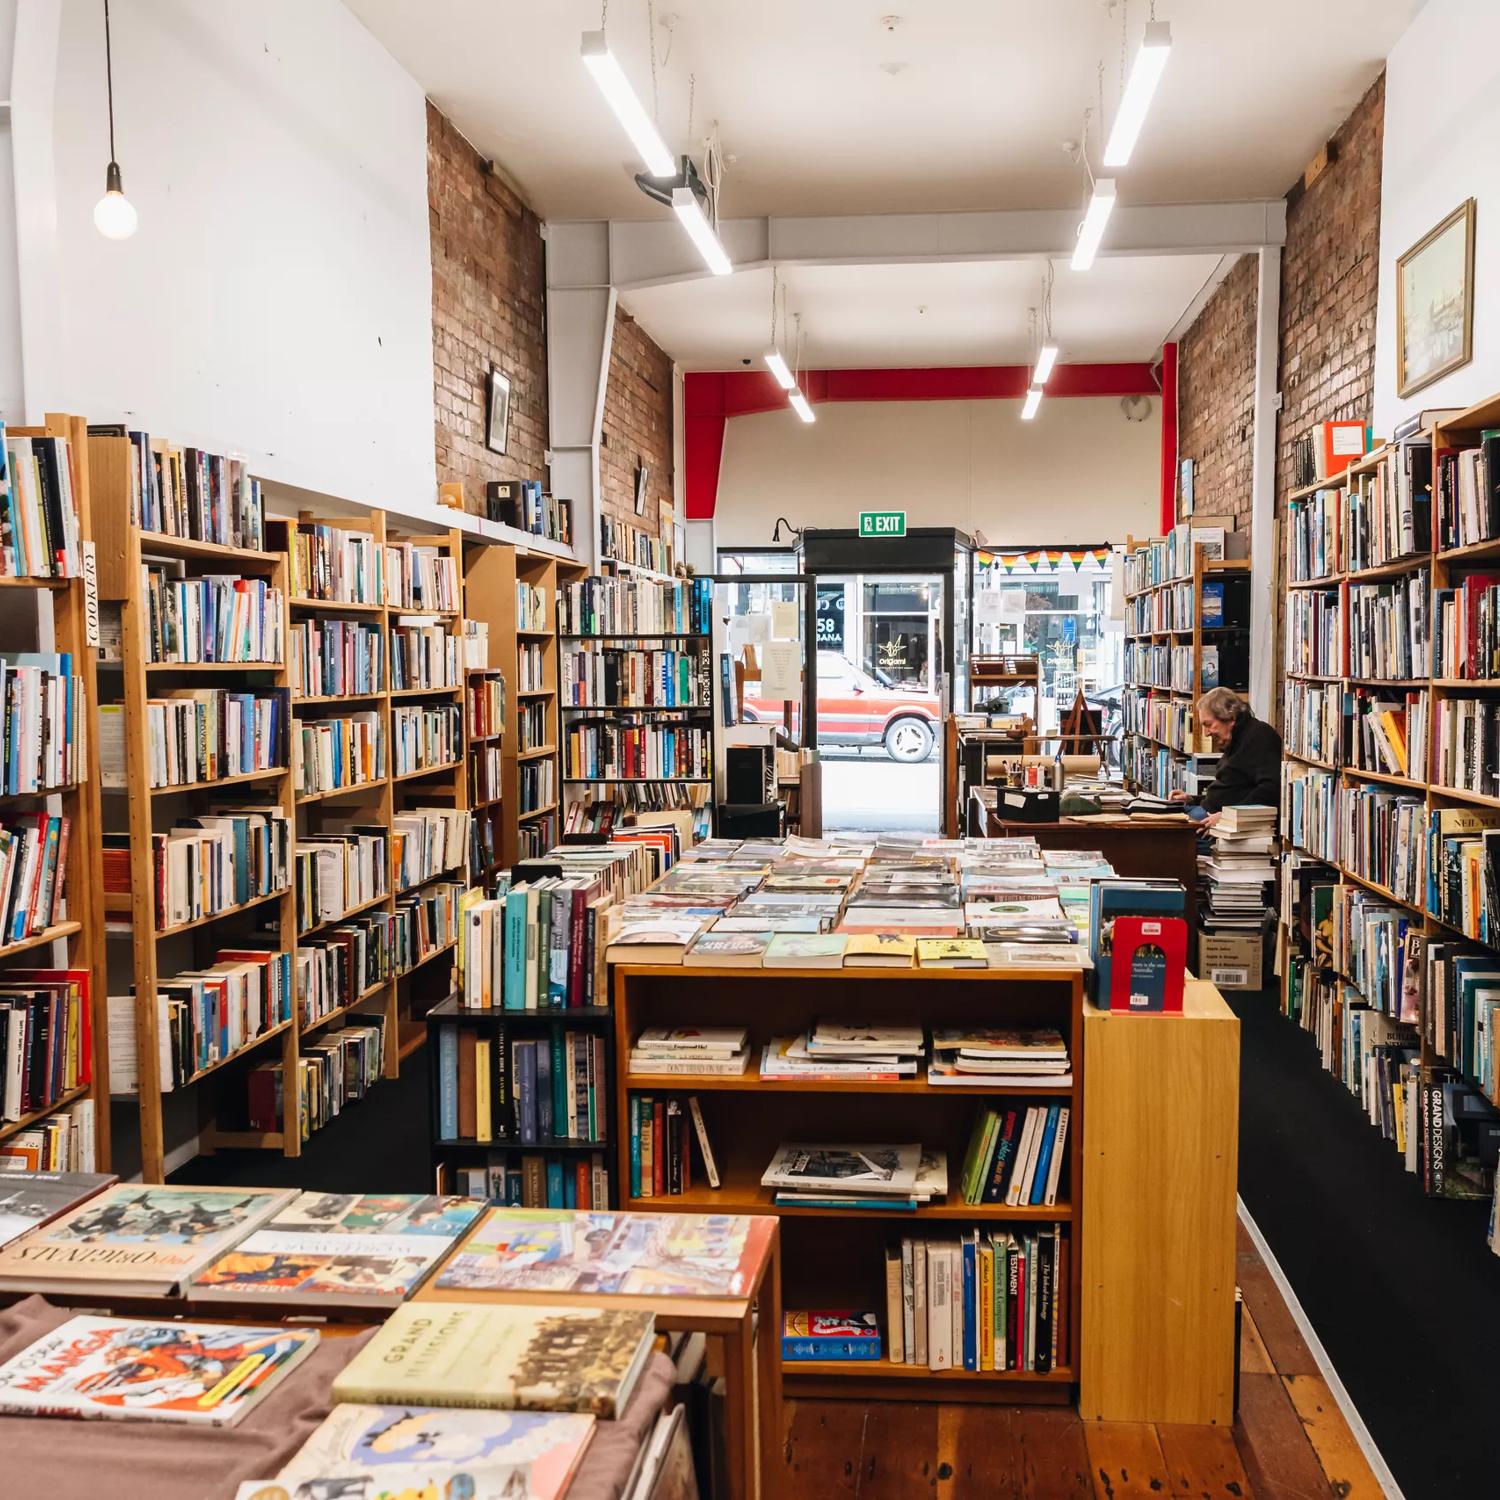 Inside The Ferret Bookshop, a book store on Cuba Street in Te Aro, Wellington. The narrow space is lined with shelves full of books and a worker sits behind the counter. 